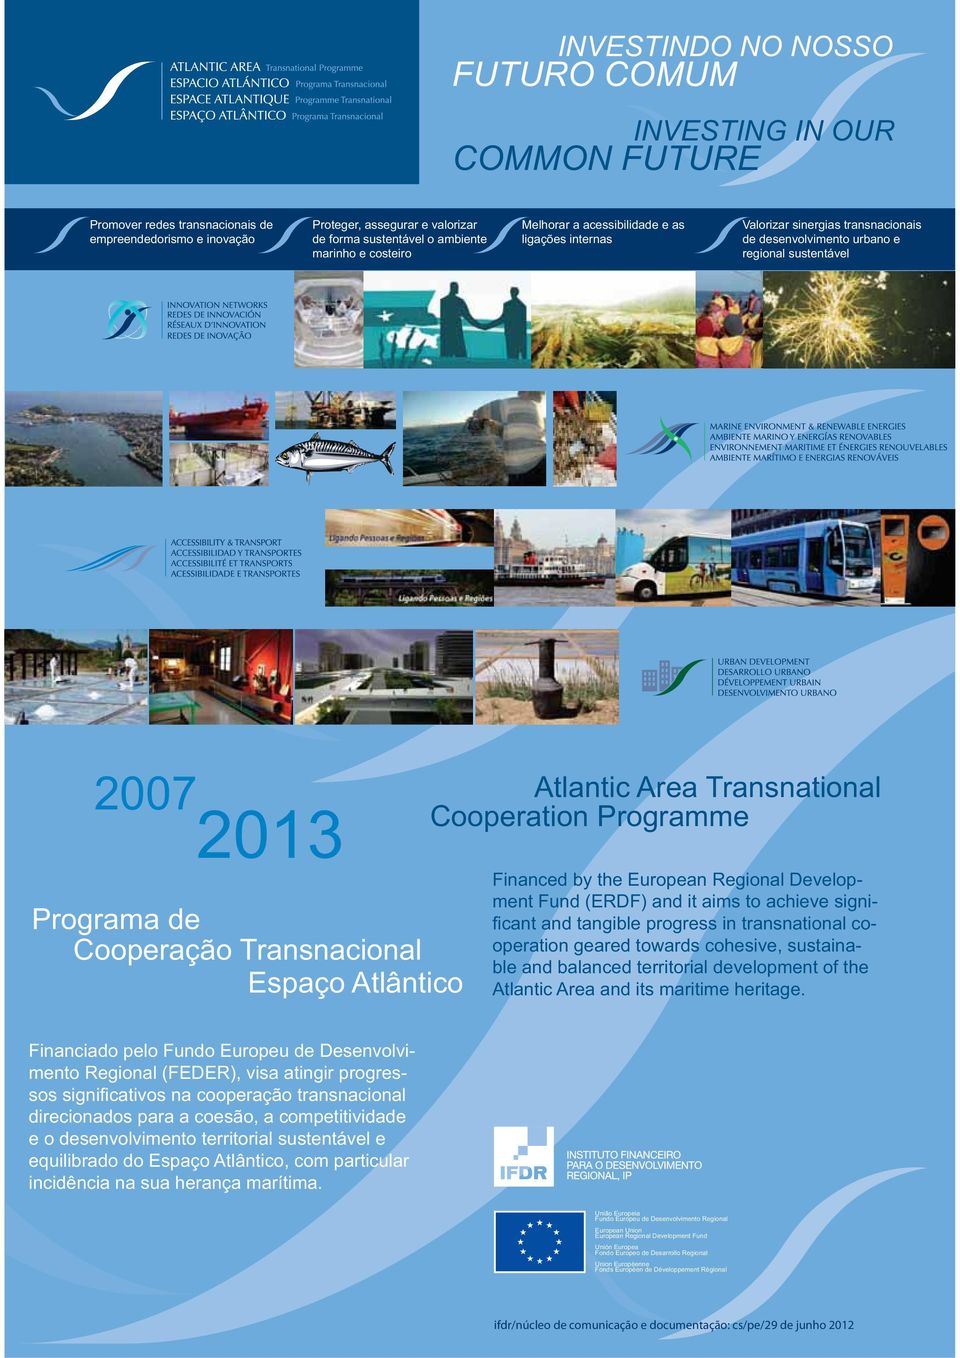 Atlântico Atlantic Area Transnational Cooperation Programme Financed by the European Regional Development Fund (ERDF) and it aims to achieve significant and tangible progress in transnational